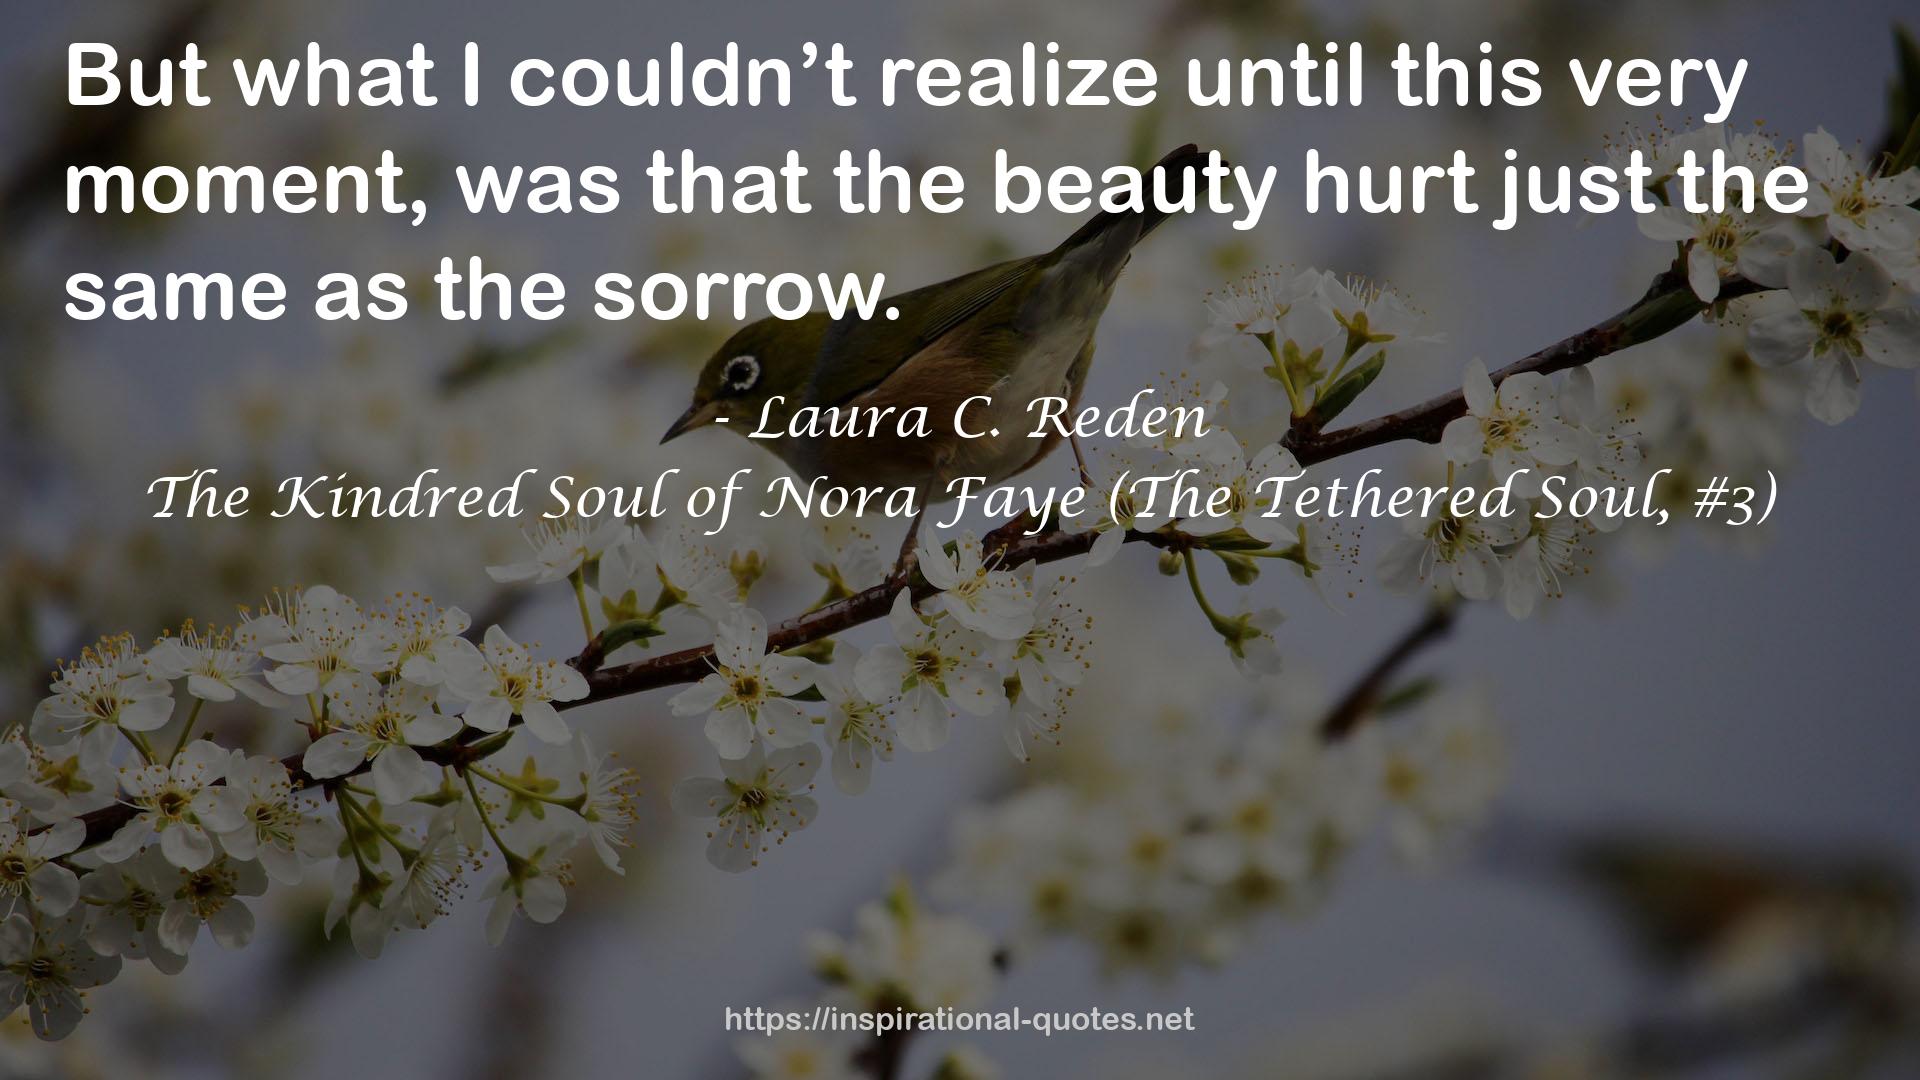 The Kindred Soul of Nora Faye (The Tethered Soul, #3) QUOTES